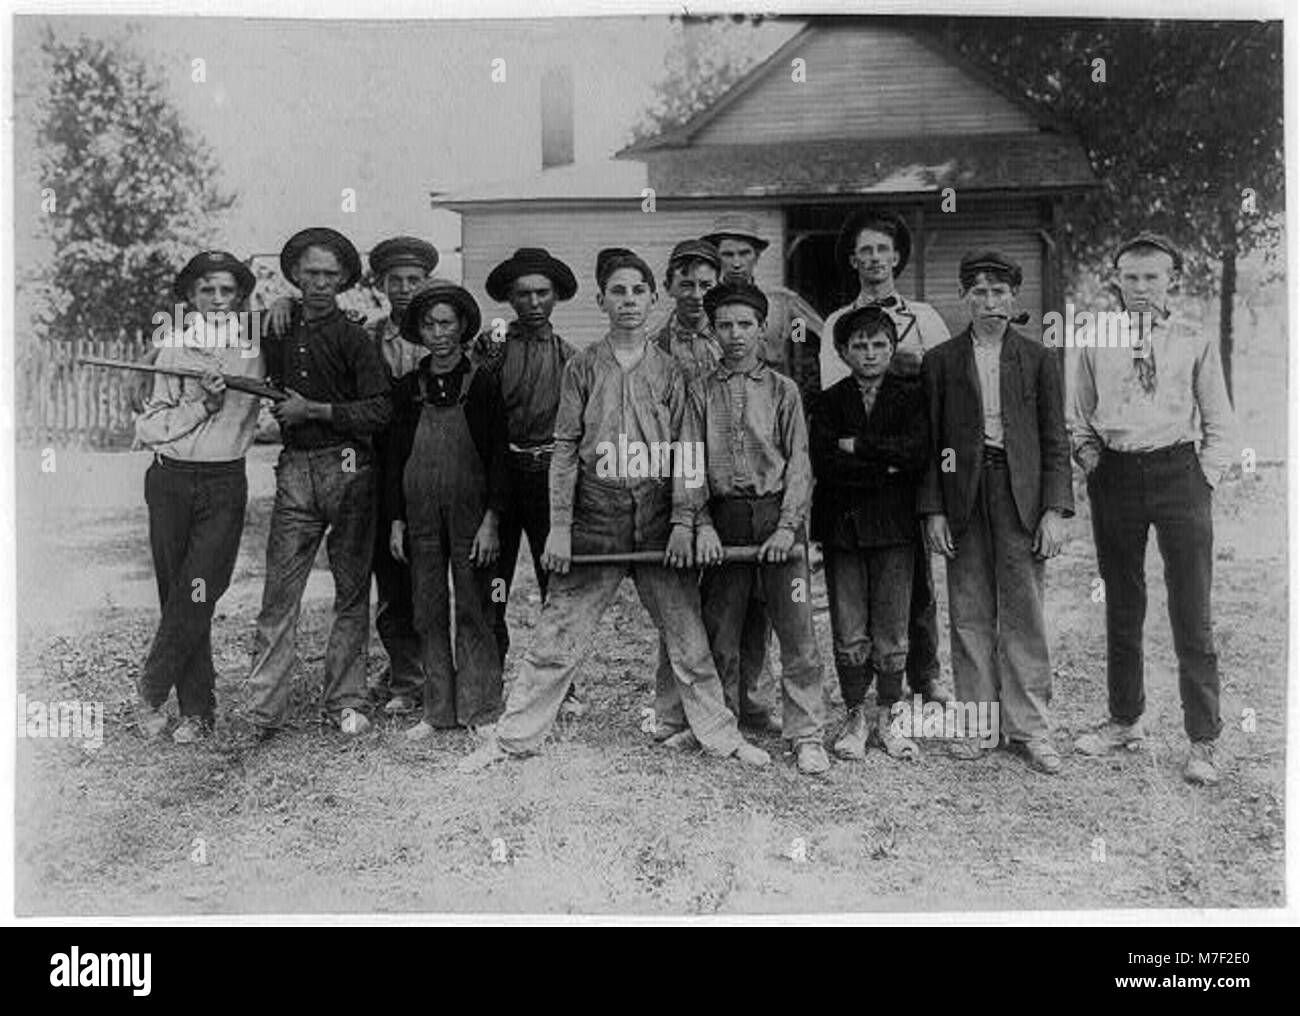 The Ball Team. Composed mainly of glass workers. Indiana. Aug. 1908. L.W.H. (Lewis Wickes Hine). LOC cph.3a01124 Stock Photo